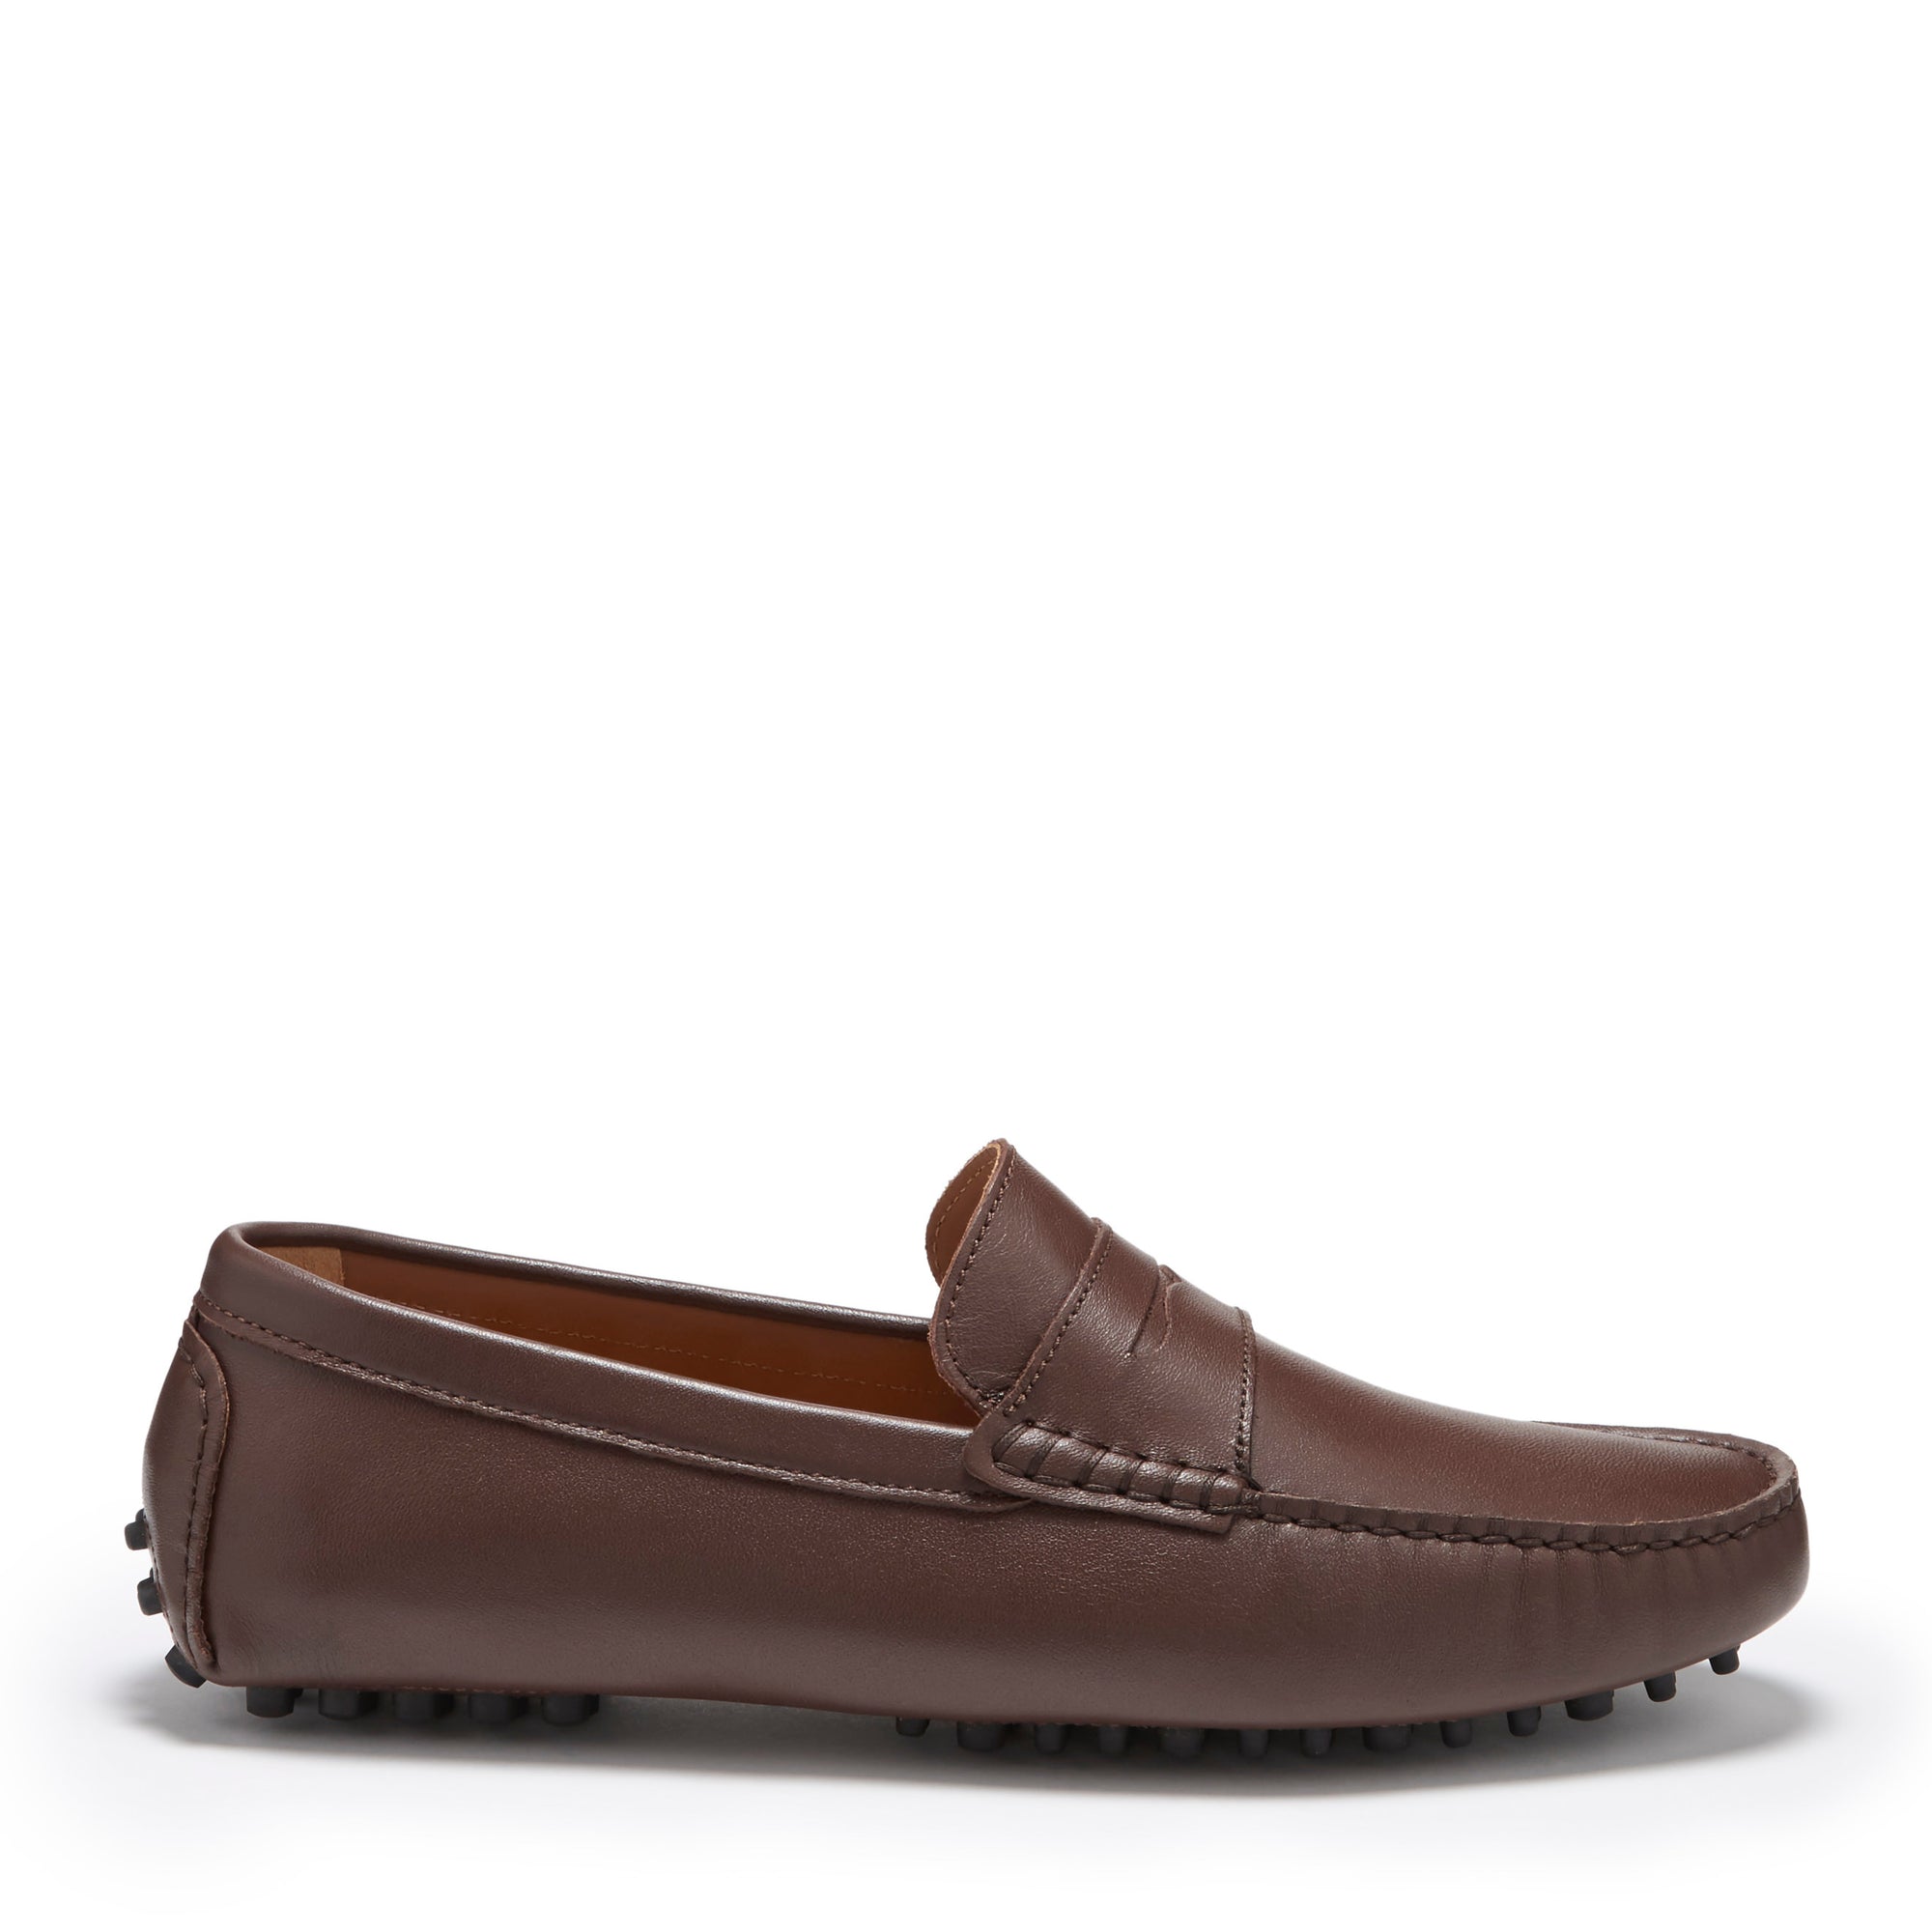 Penny Driving Loafers, brown leather - Hugs & Co.